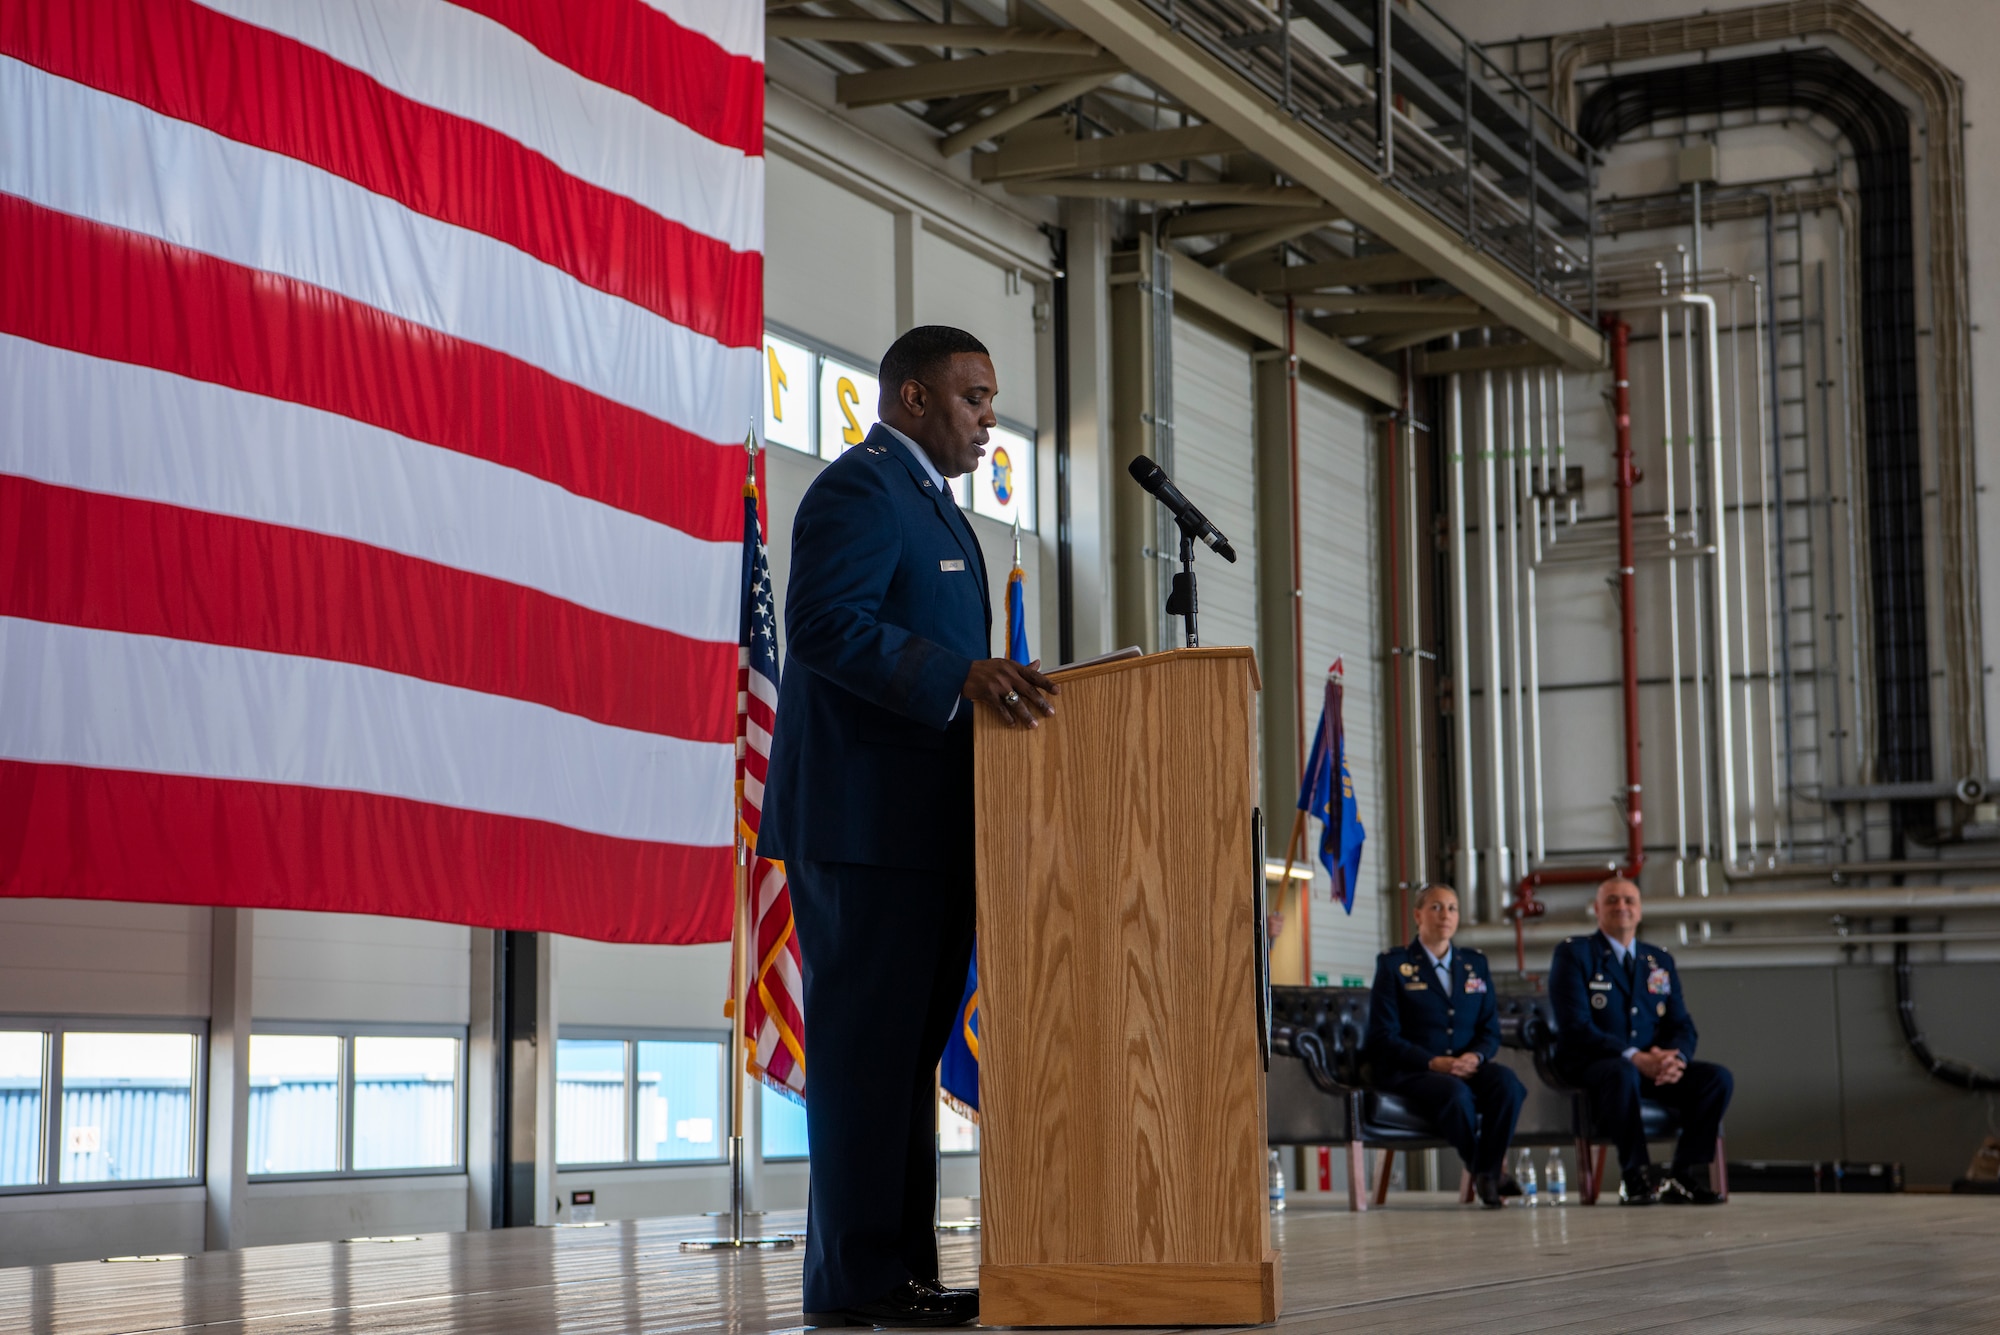 U.S. Air Force Brig. Gen. Otis C. Jones, 86th Airlift Wing commander, speaks at the 86th Mission Support Group change of command at Ramstein Air Base, Germany, June 9, 2023.